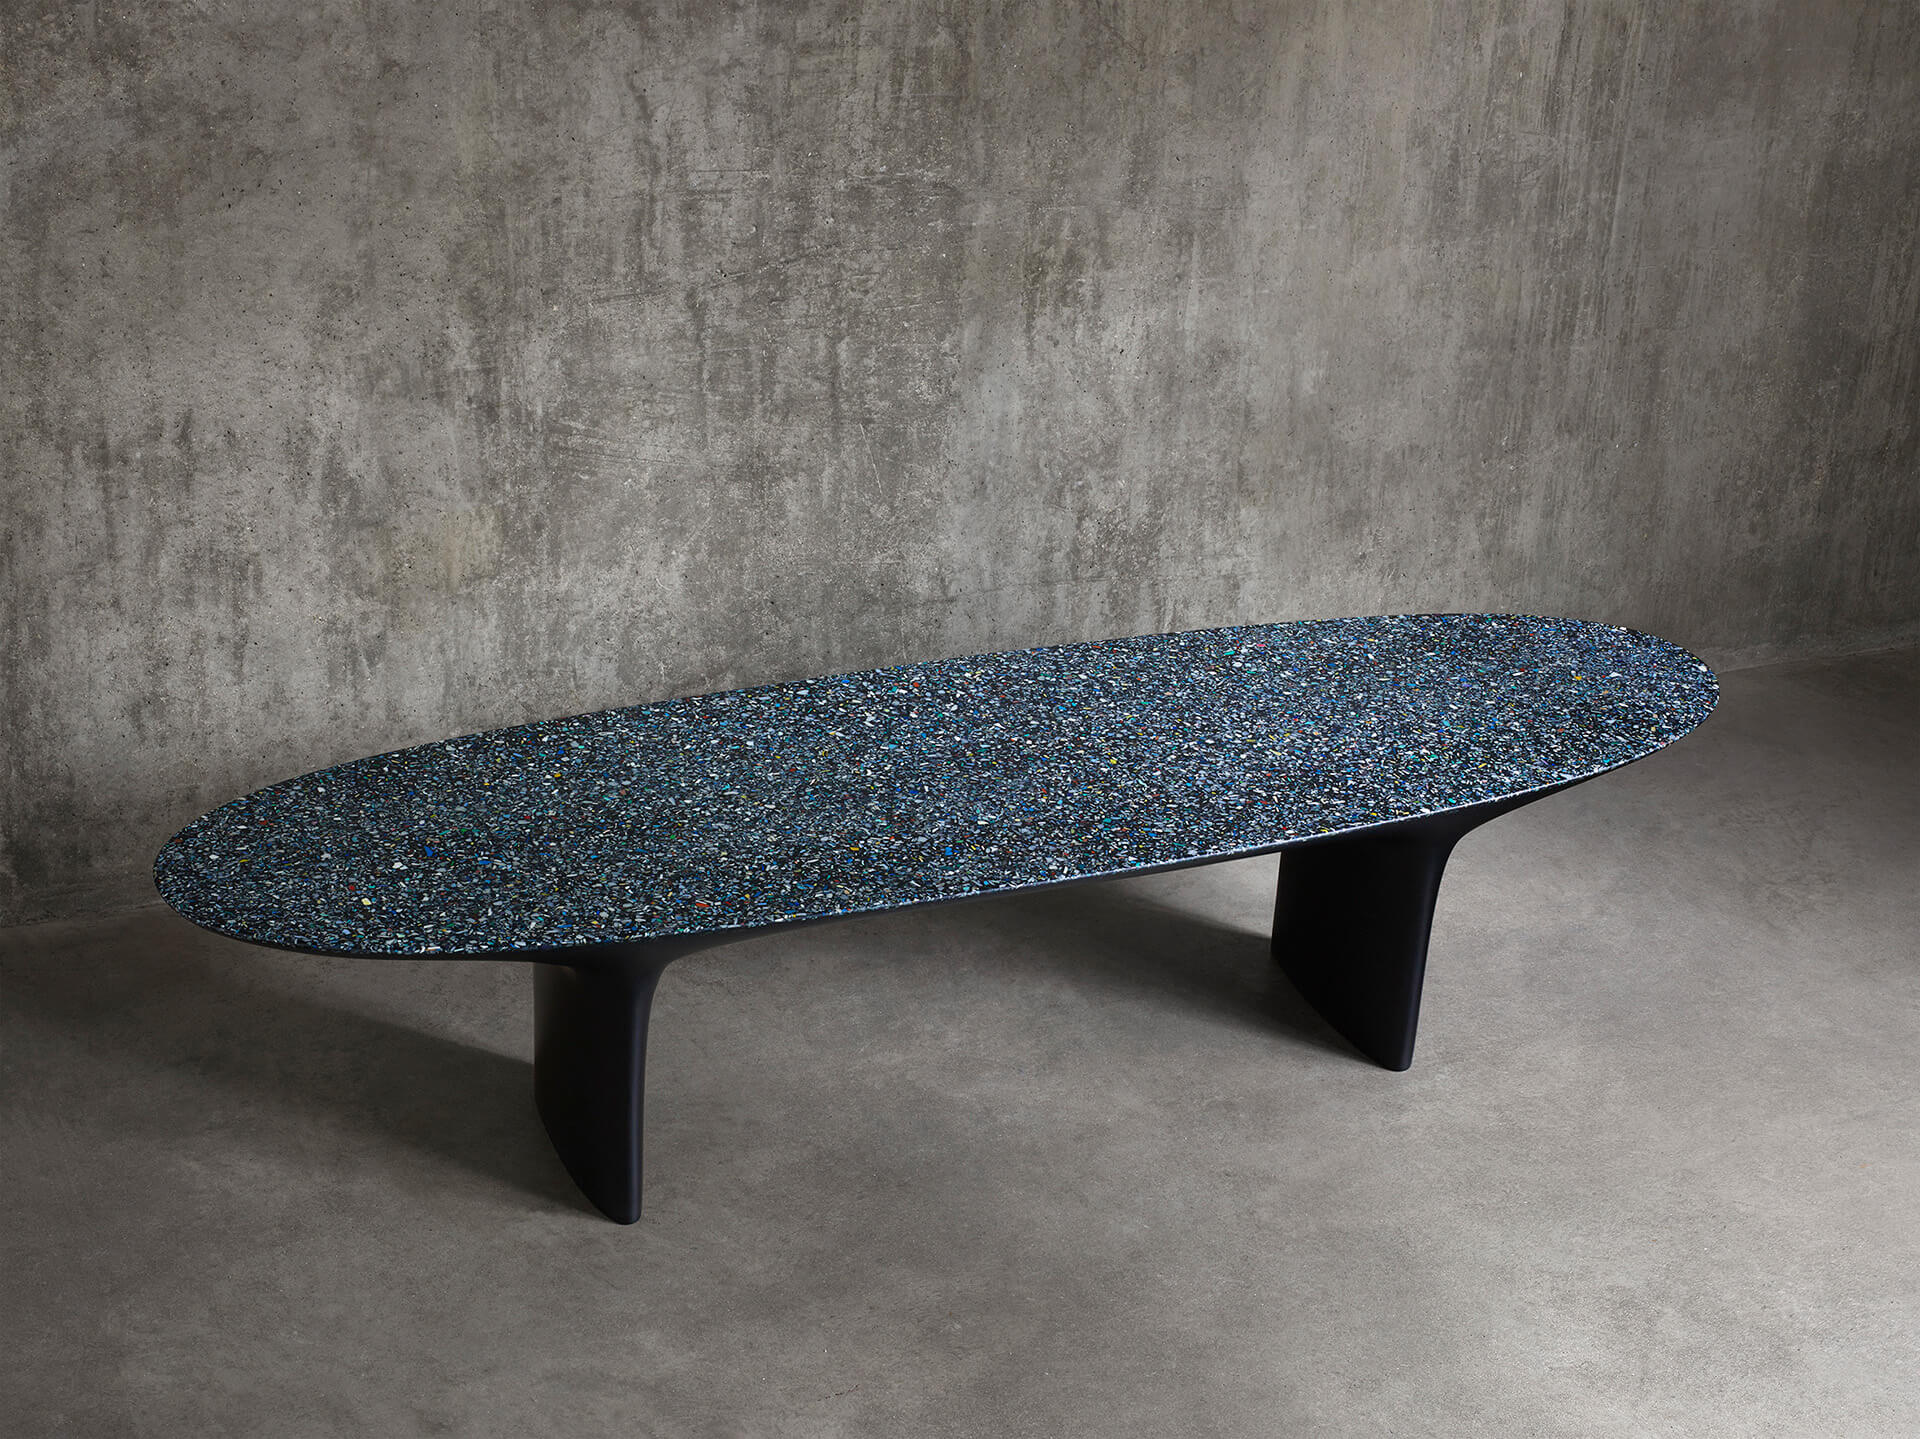 Object of desire: Brodie Neill’s reclaimed ‘Flotsam’ coffee table